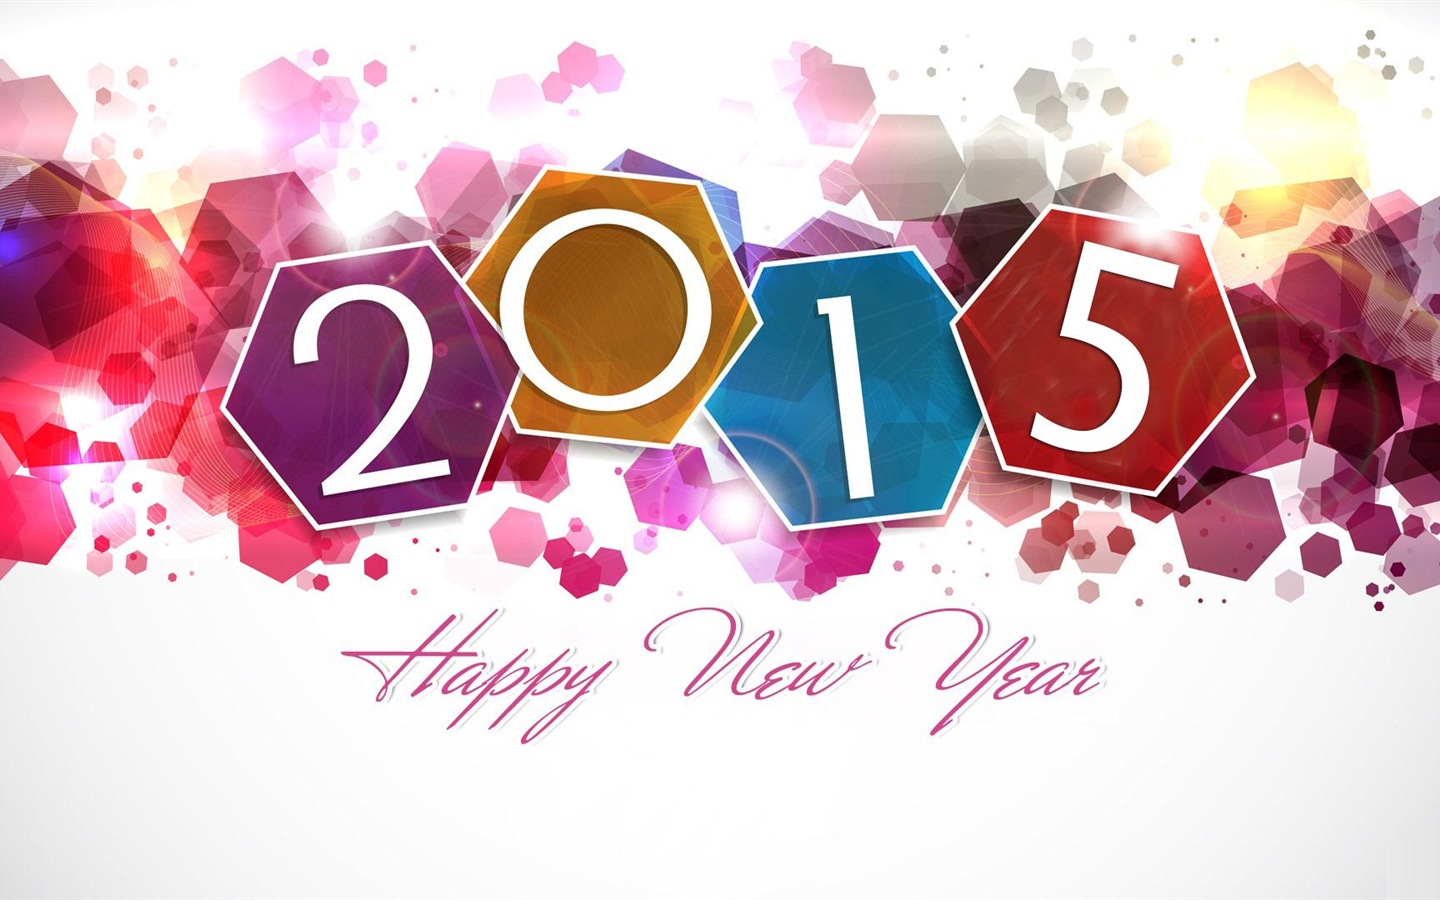 2015 New Year theme HD wallpapers (2) #17 - 1440x900